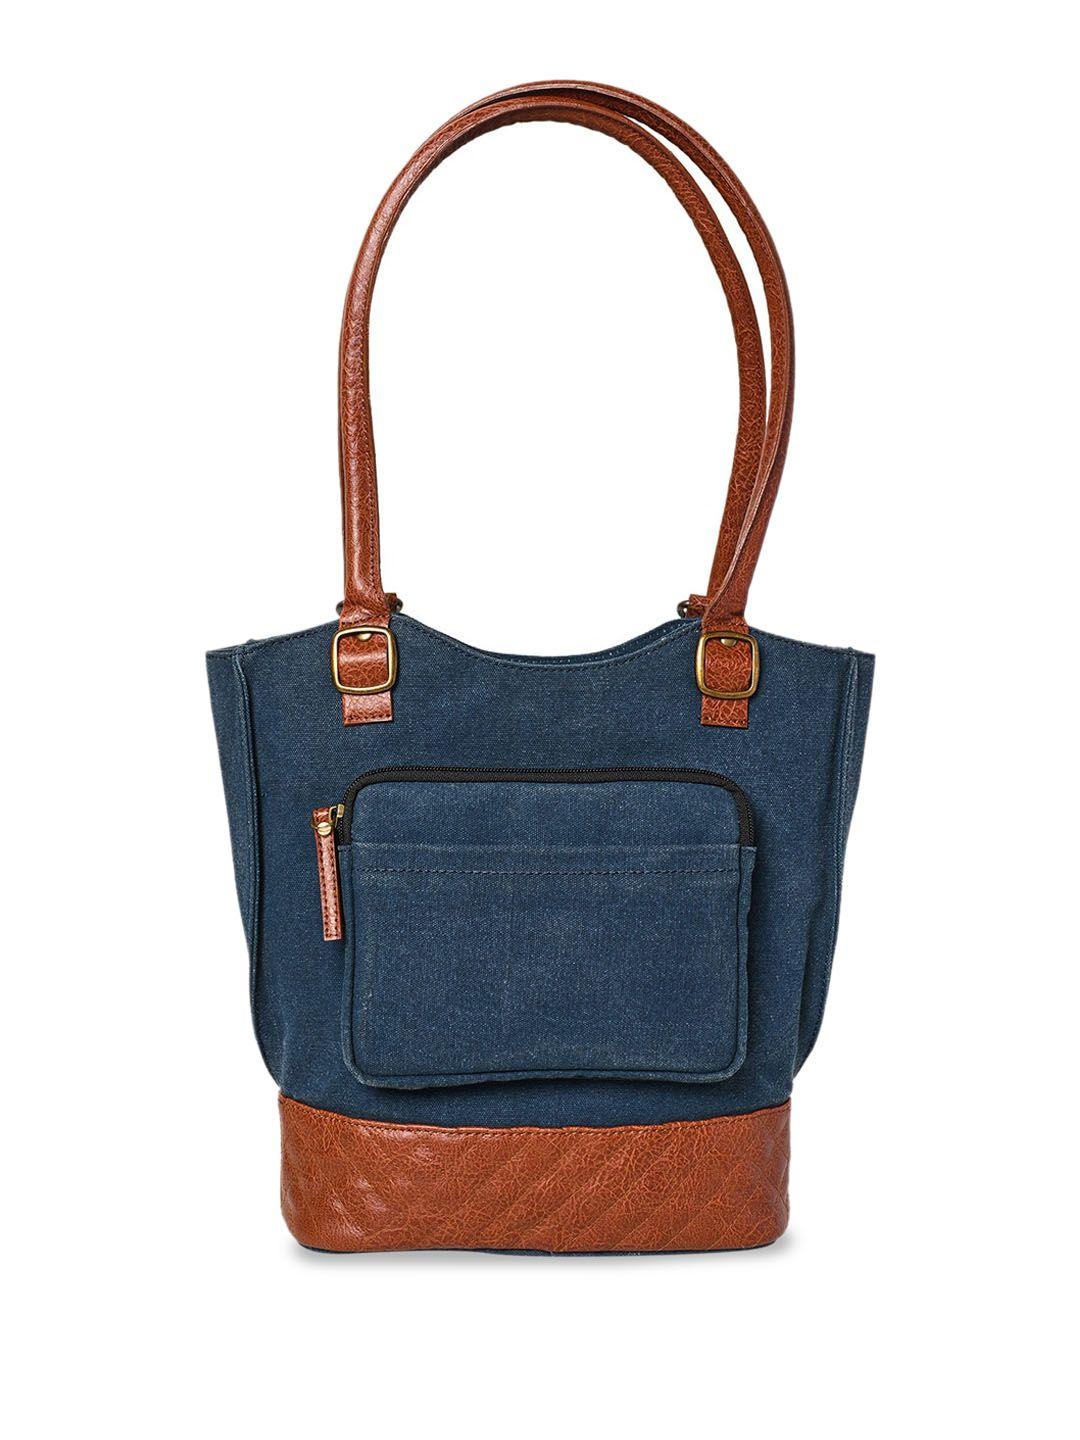 mona-b-navy-blue-colourblocked-structured-shoulder-bag-with-applique